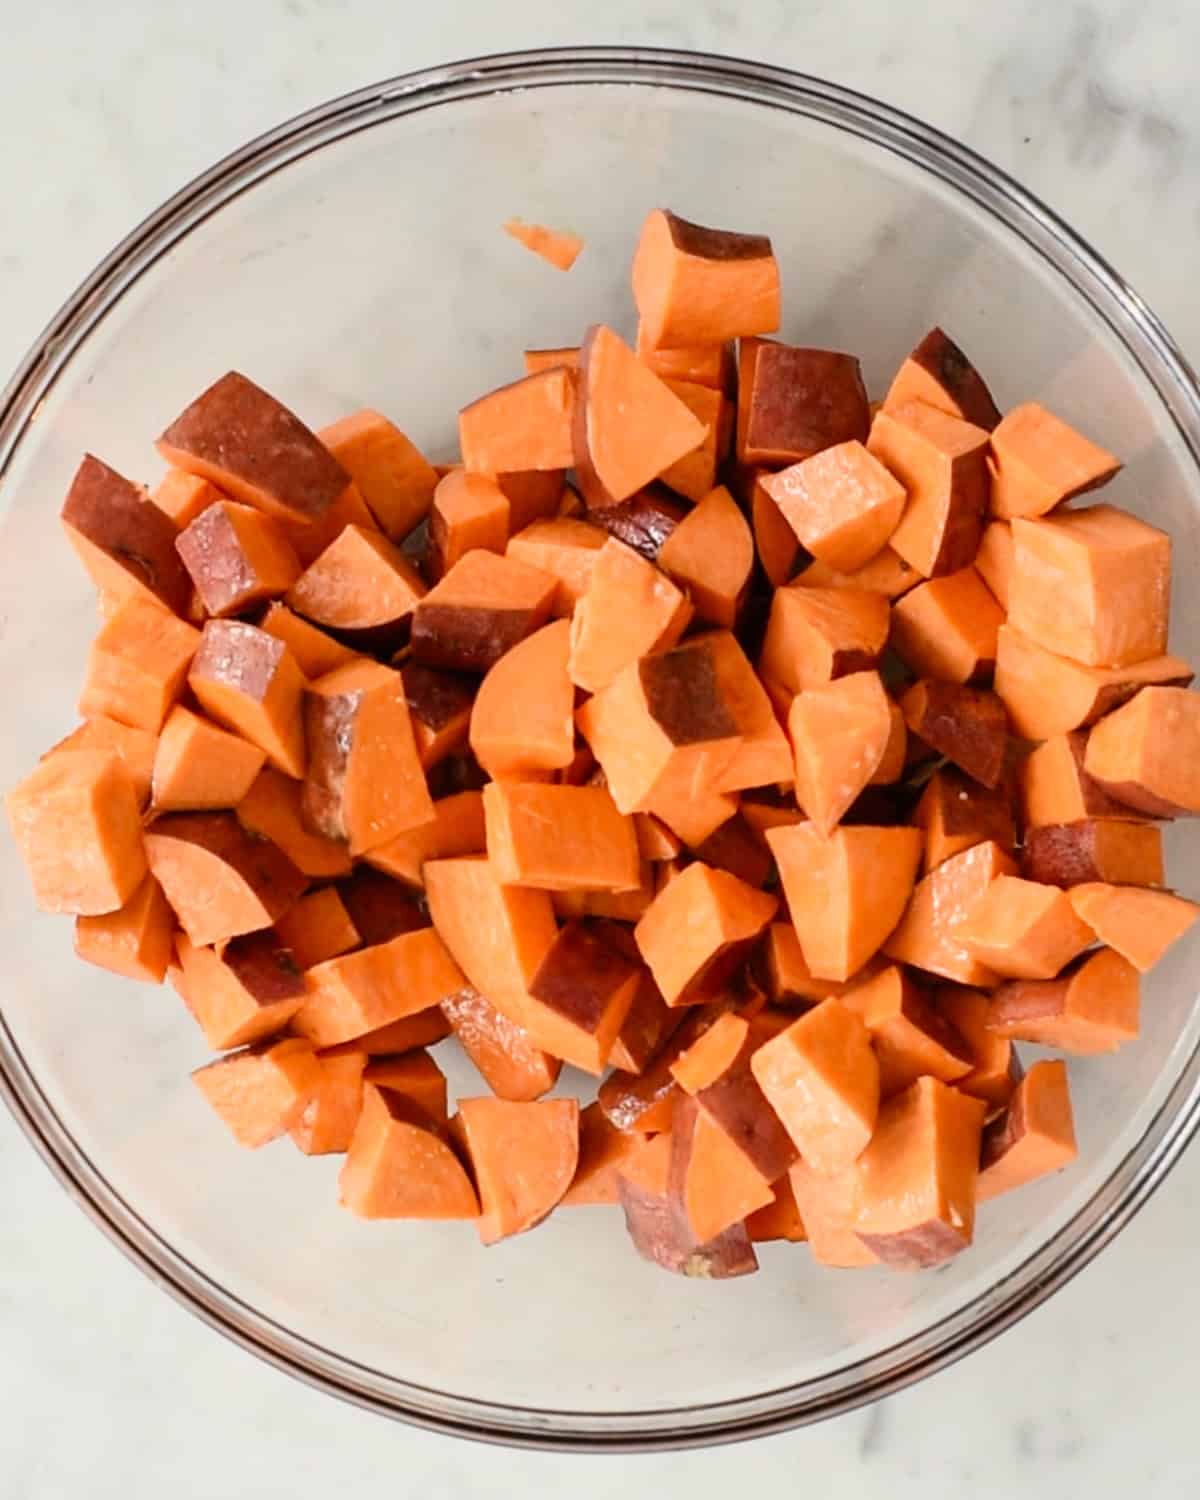 how to make Cinnamon Roasted Sweet Potatoes - sweet potato cubes in a bowl coated in melted butter